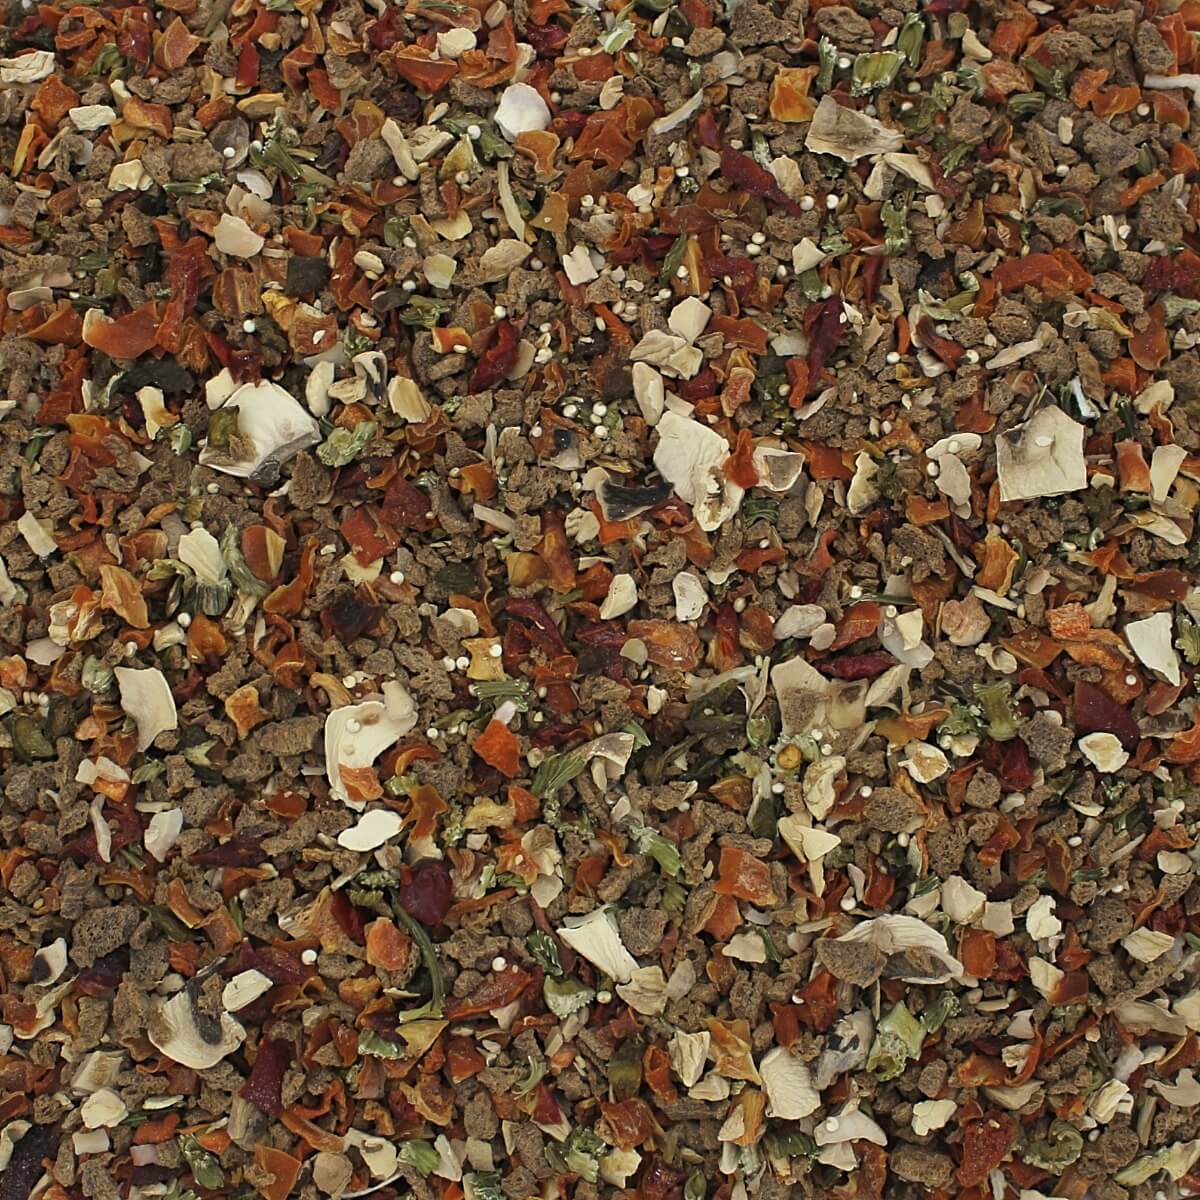 A close up of a pile of dried herbs and spices from the Harmony House Soup and Chili Mix Sampler (12 ct).